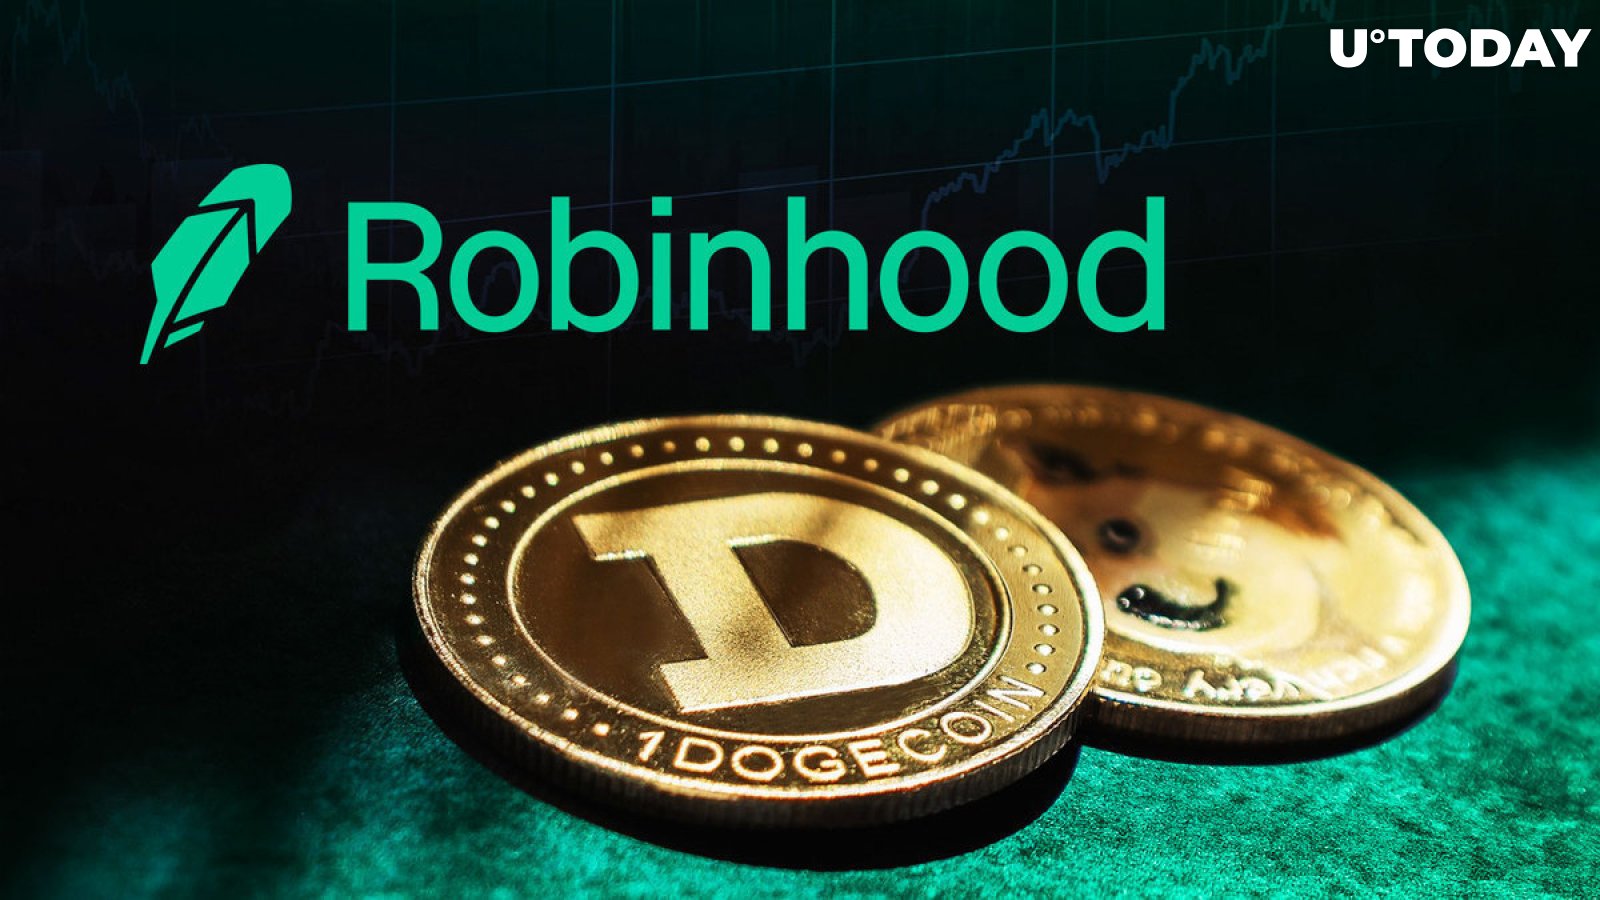 103.2 Million Dogecoin Goes to Robinhood as DOGE Up 5% - Mysterious Whale Spotted